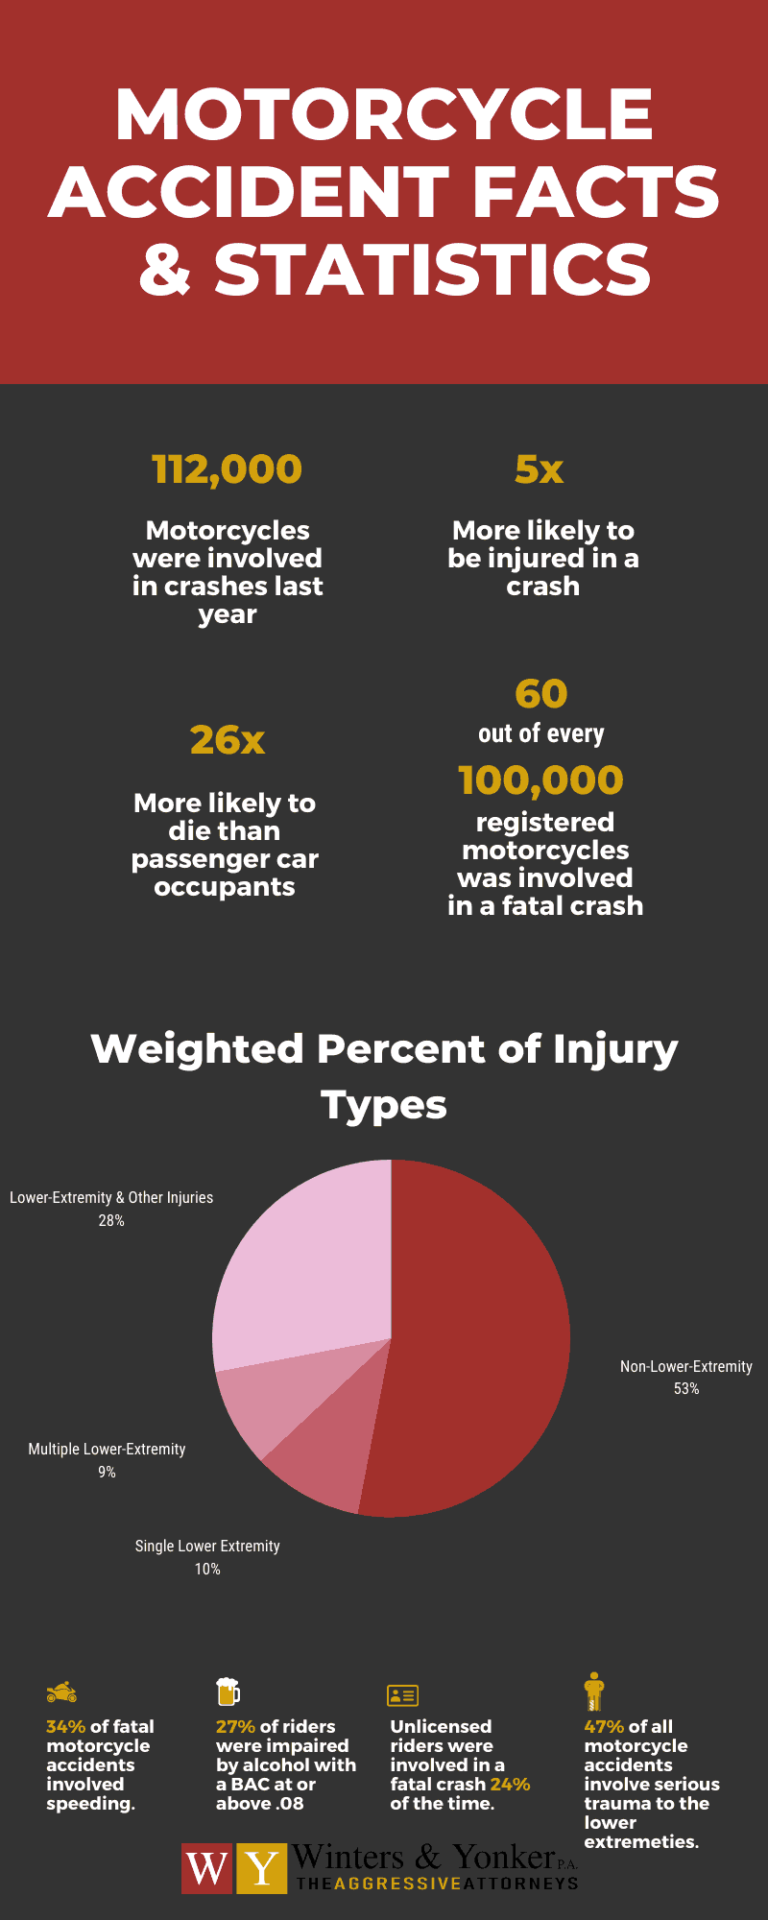 What Are Common Injuries Sustained In Motorcycle Accidents?